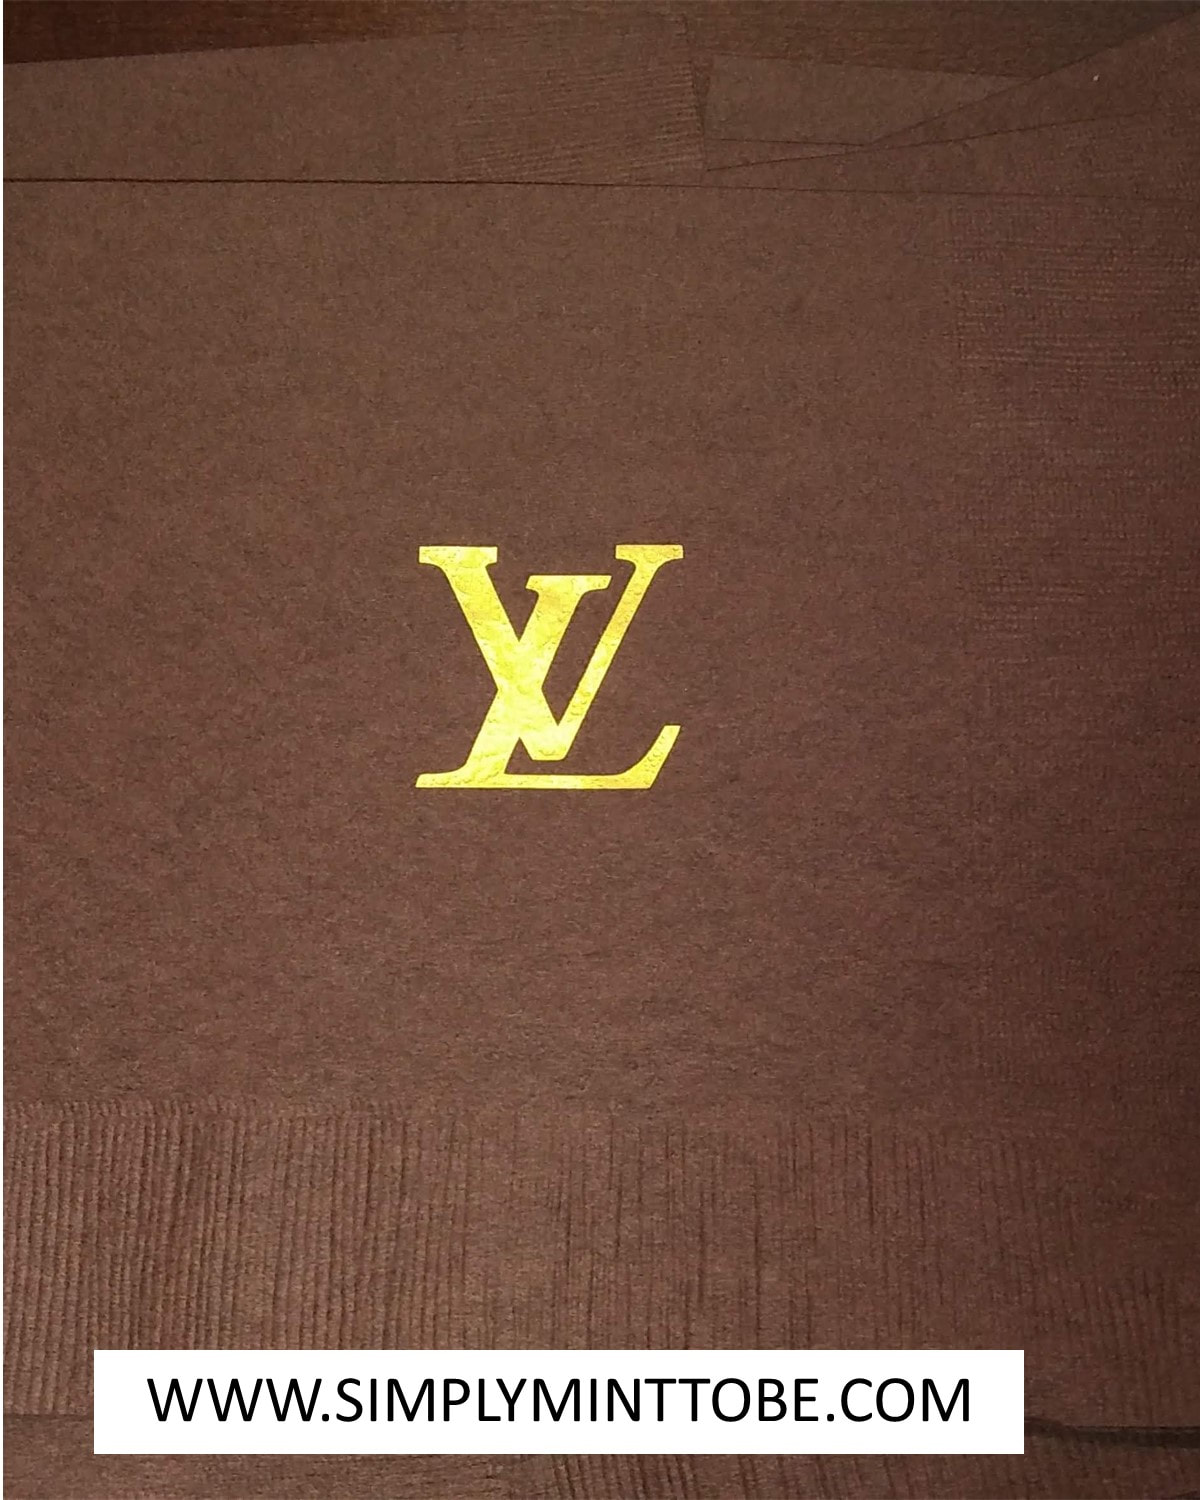 Louis Vuitton Inspired Brown Paper Plates with Gold LV Logo Sold in Sets of  10 Great for all occasions Birthdays, Wedding Showers, Bridal Shower, Sweet  Sixteen